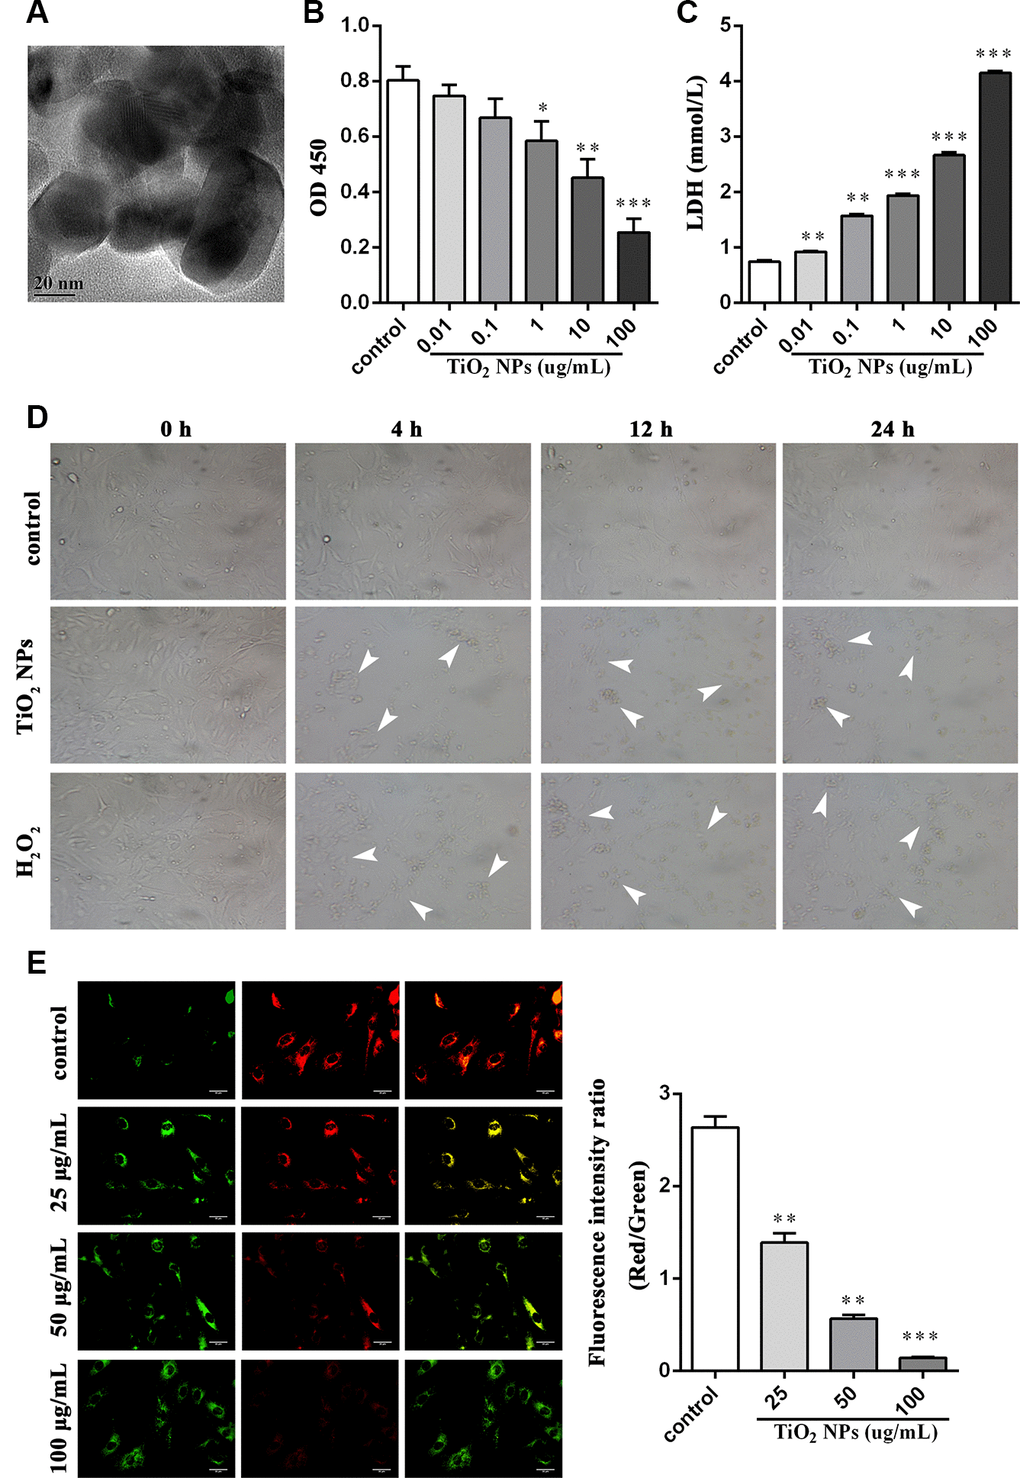 TiO2 NPs boosted cell damage of corneal endothelial cells. (A) Detection of shape and size of TiO2 NPs by TEM, bar = 20 nm. (B) Cell viability of TiO2 NPs-treated primary endothelial cells. (C) Measurement of LDH content in TiO2 NPs-treated primary endothelial cells. (D) Morphological analysis of TiO2 NPs-treated primary endothelial cells by inverted microscope, bar = 50 μm. (E) Mitochondrial membrane potential of TiO2 NPs-treated primary endothelial cells by using JC-1, bar = 30 μm. *P**P***P